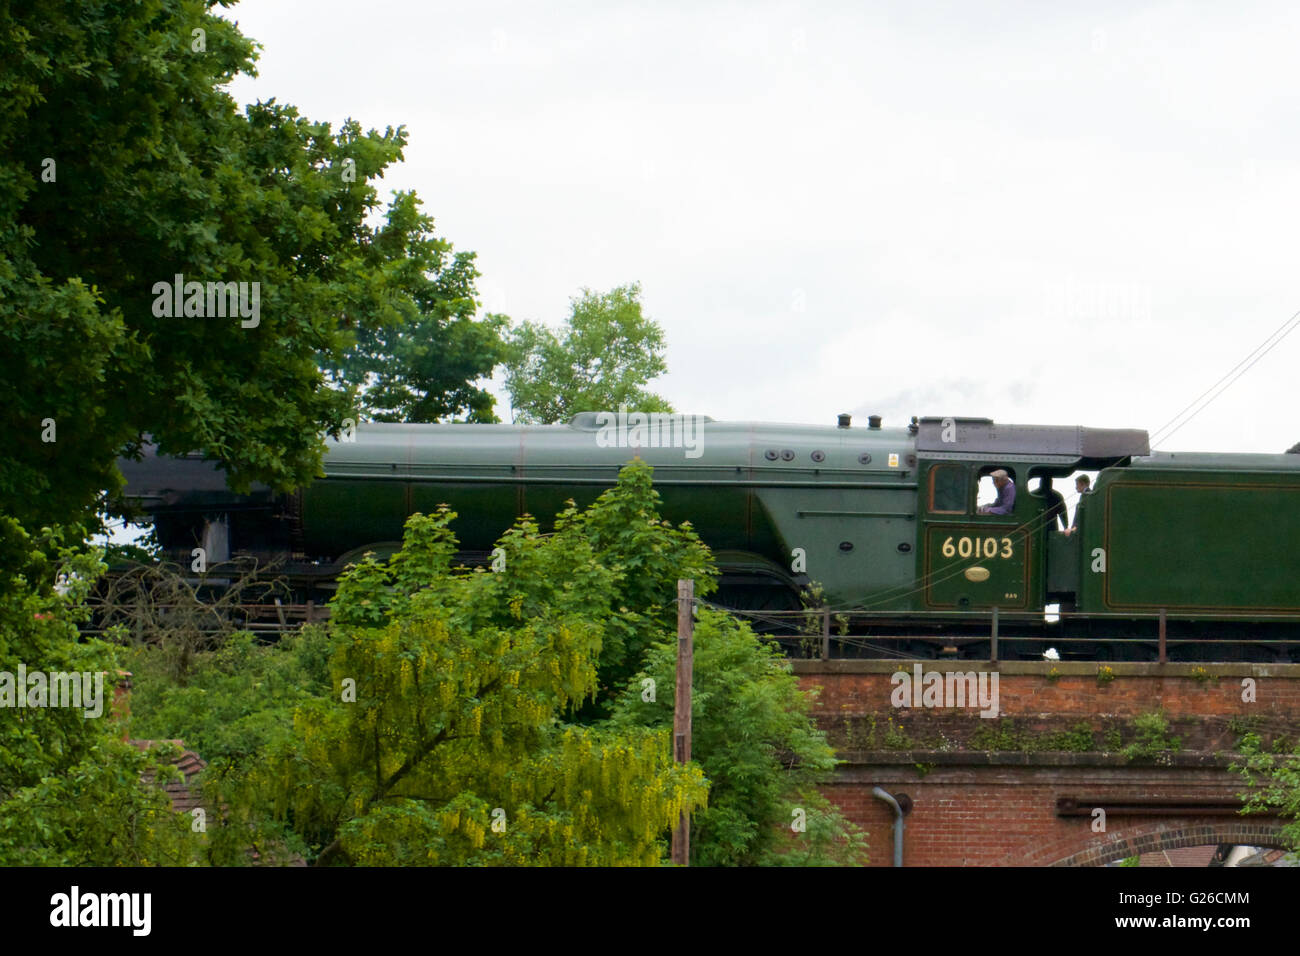 The Flying Scotsman 60103 Cathedrals Express crosses Nutley Lane Bridge as it steams through the Surrey Hills at Reigate, Surrey. 1428hrs Wednesday 25th May 2016 en route to London Victoria. Photo: Credit: Lindsay Constable / Alamy Live News Stock Photo